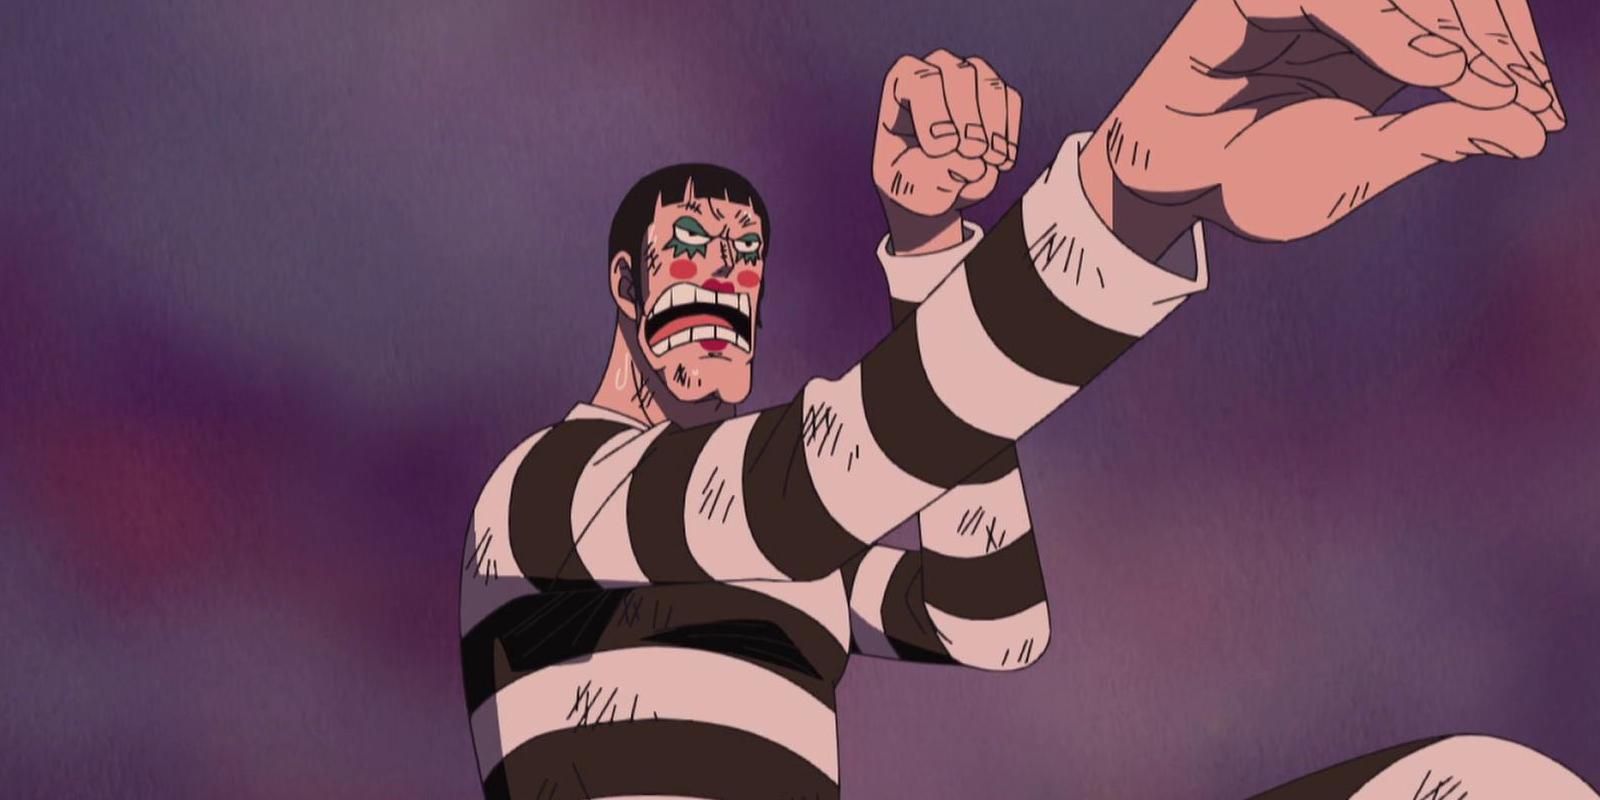 Bon Clay wearing a striped black shirt fighting in One Piece.